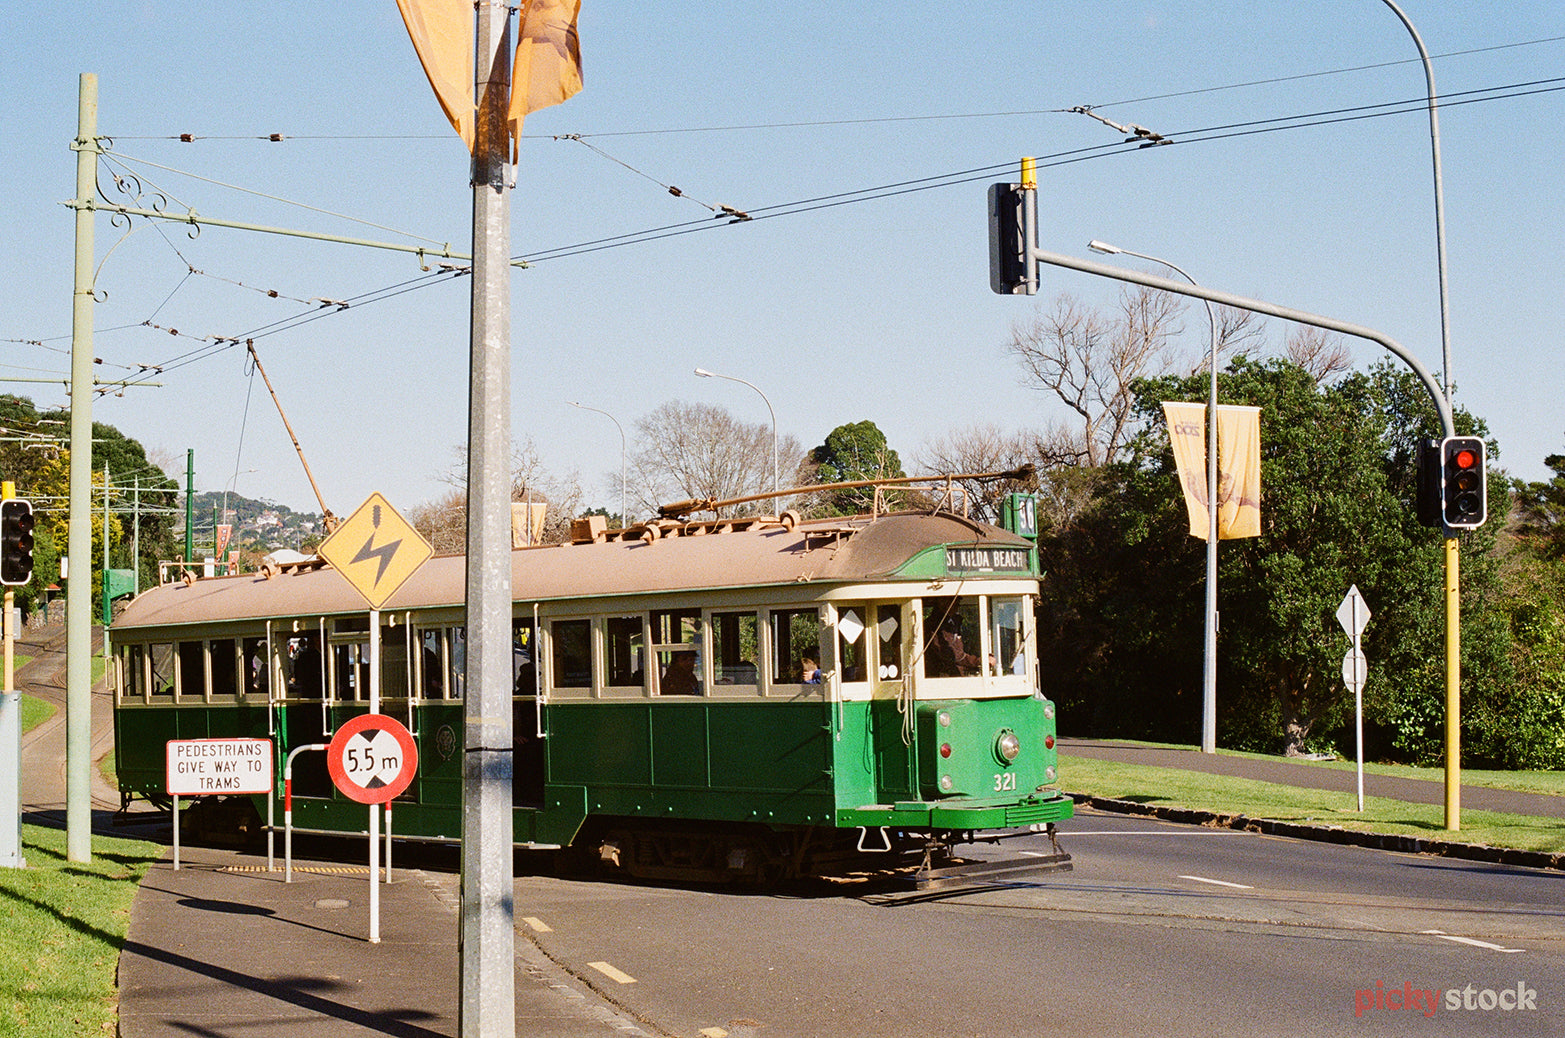 An old bright green tram turns across the tracks at Western Springs. The tram says "Saint Kilda" on the front of it. 